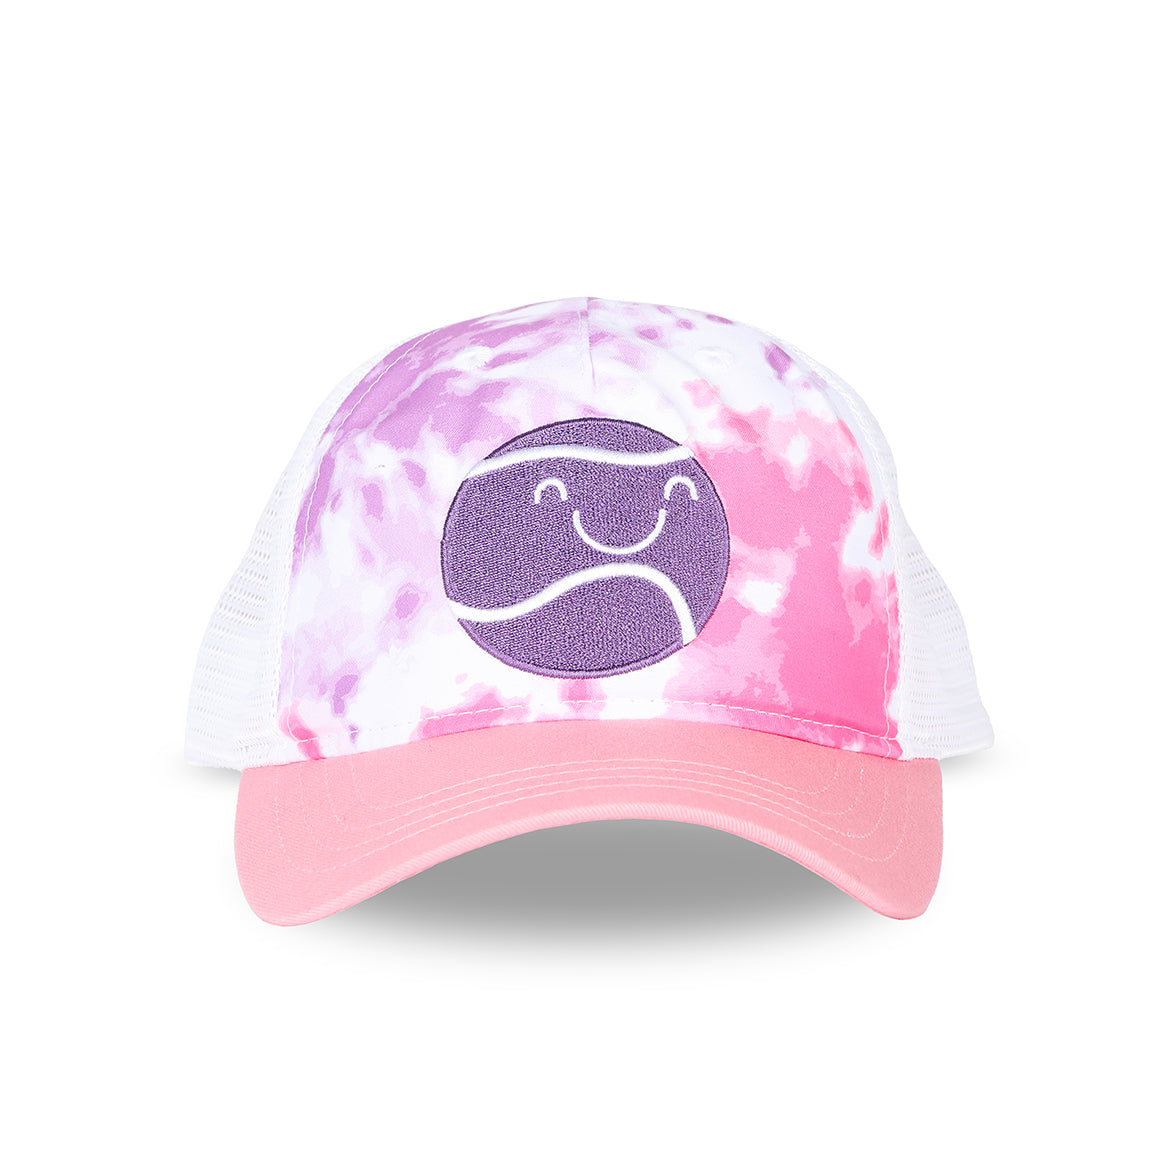 Front view of pink purple and white tie dye kids trucker hat with purple smiling tennis ball embroidered on front